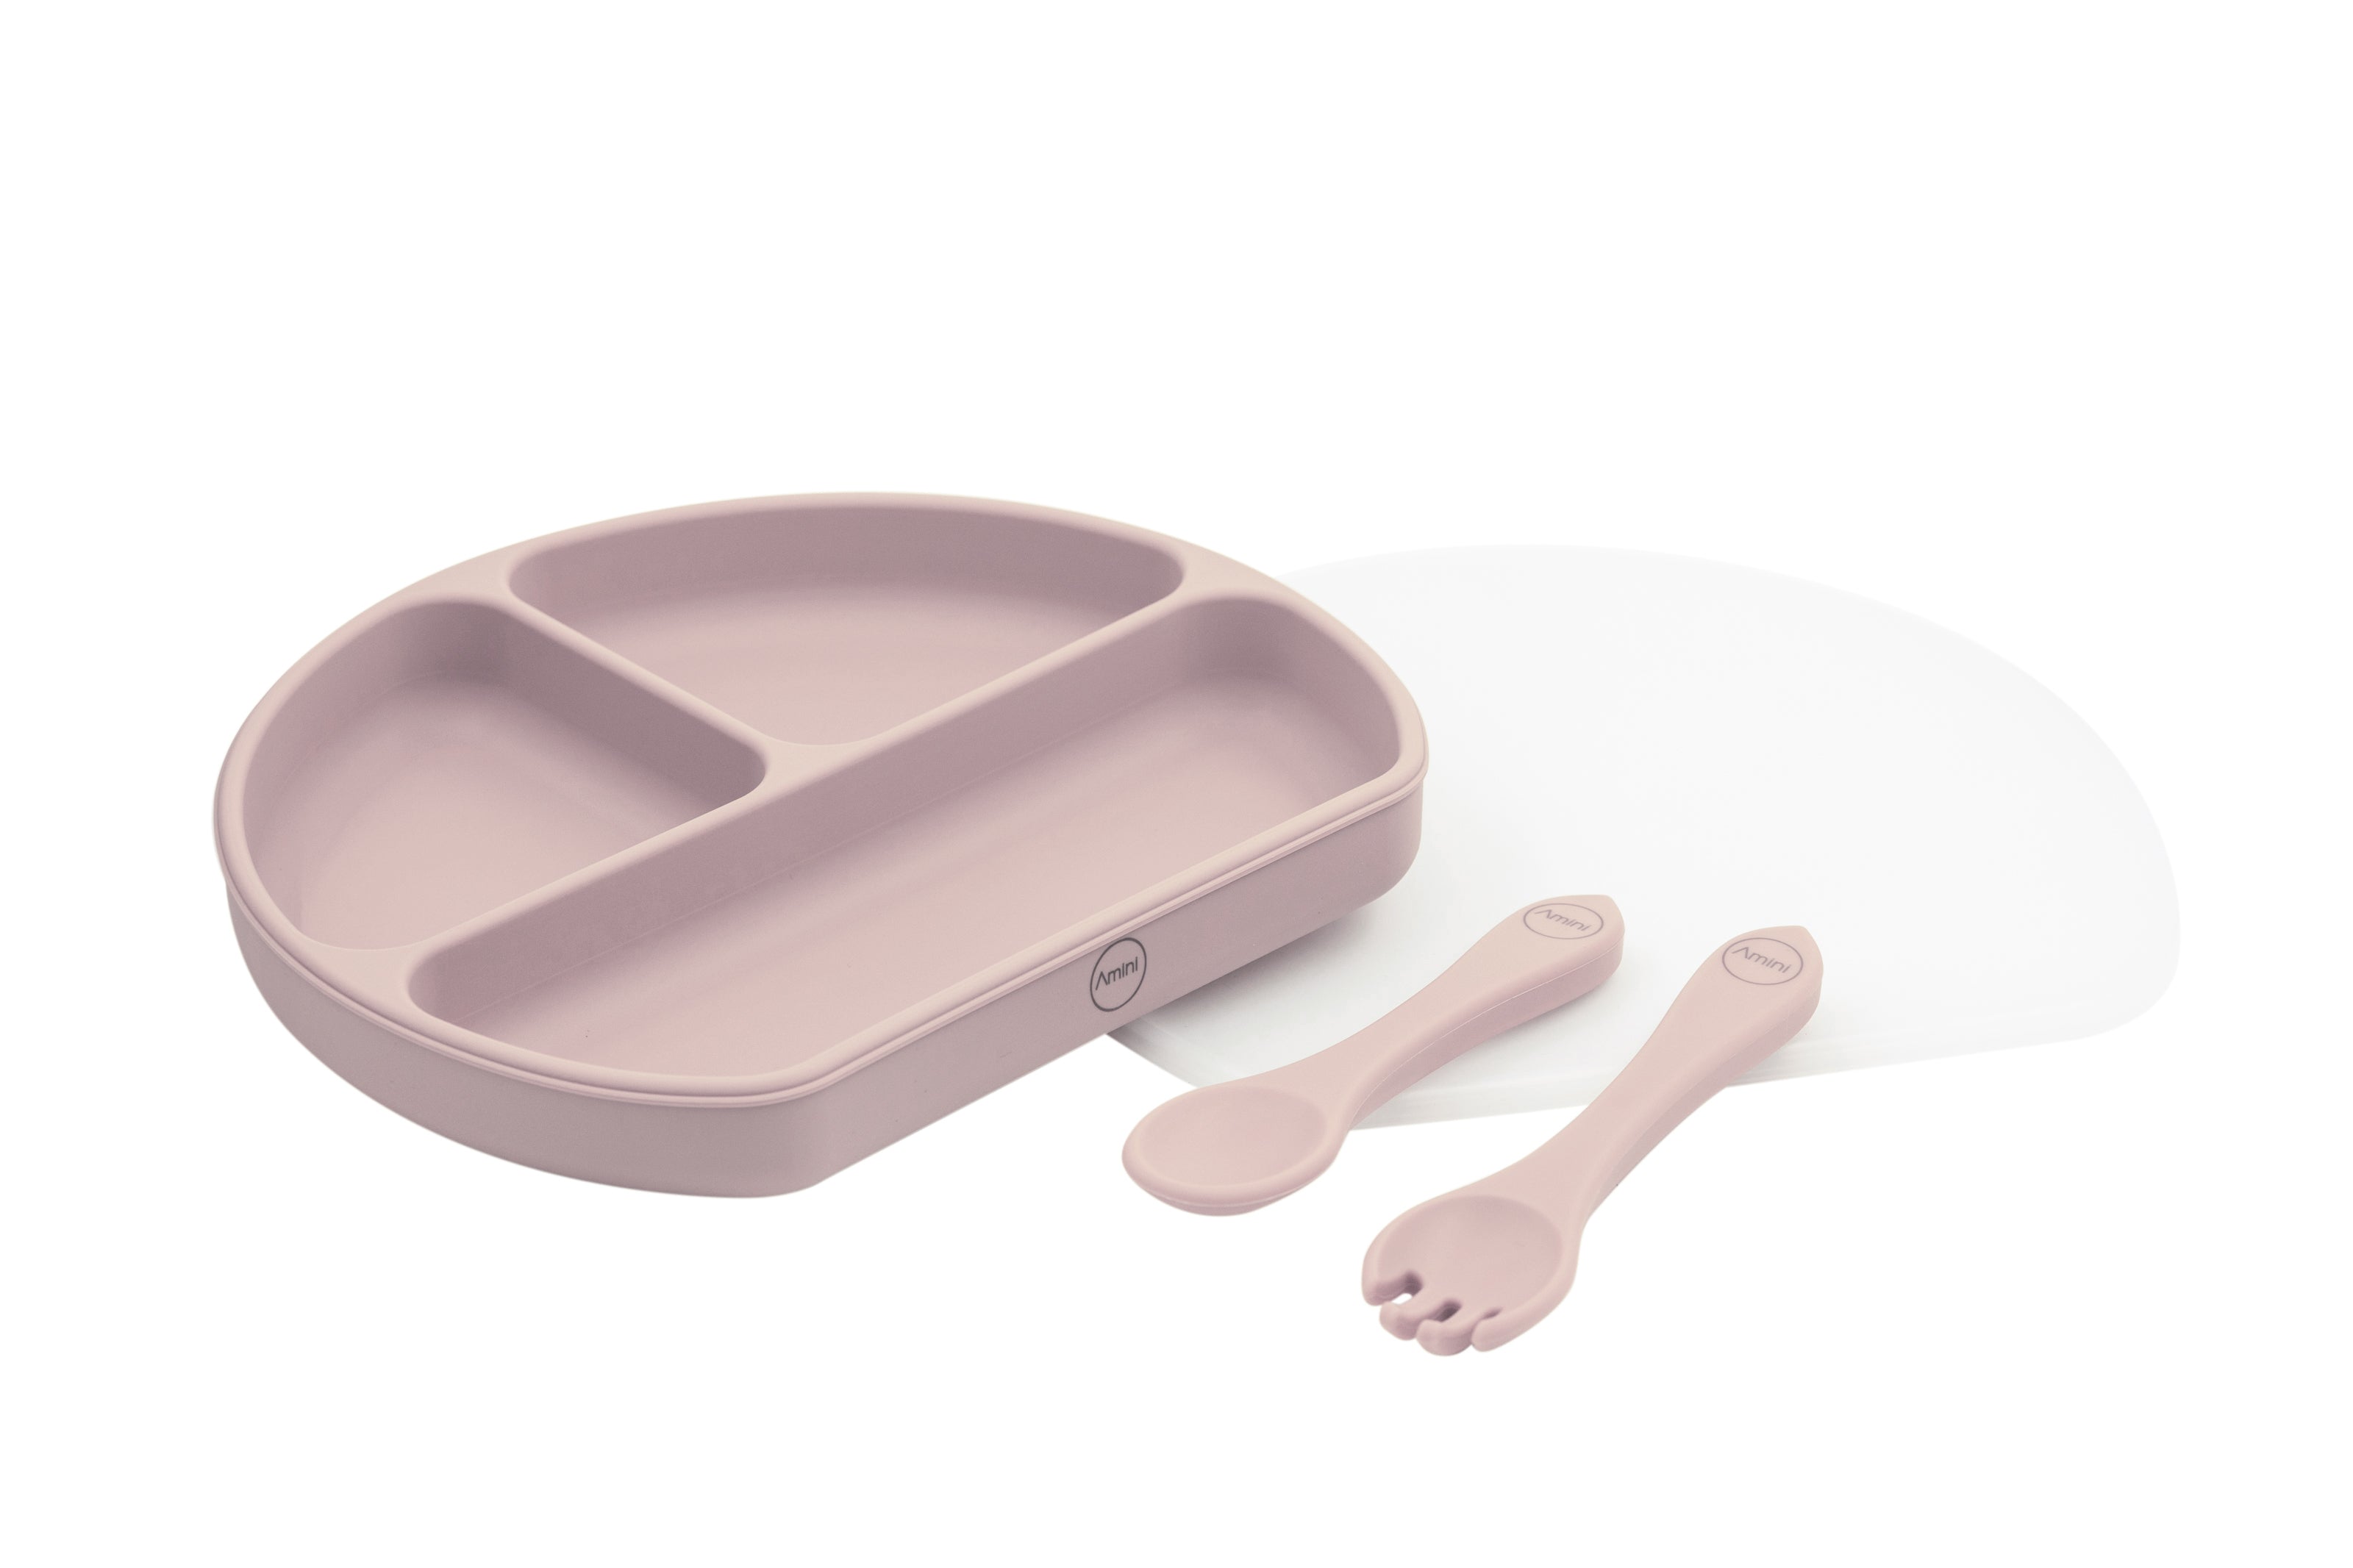 Amini Kids Silicone Plate with Cover